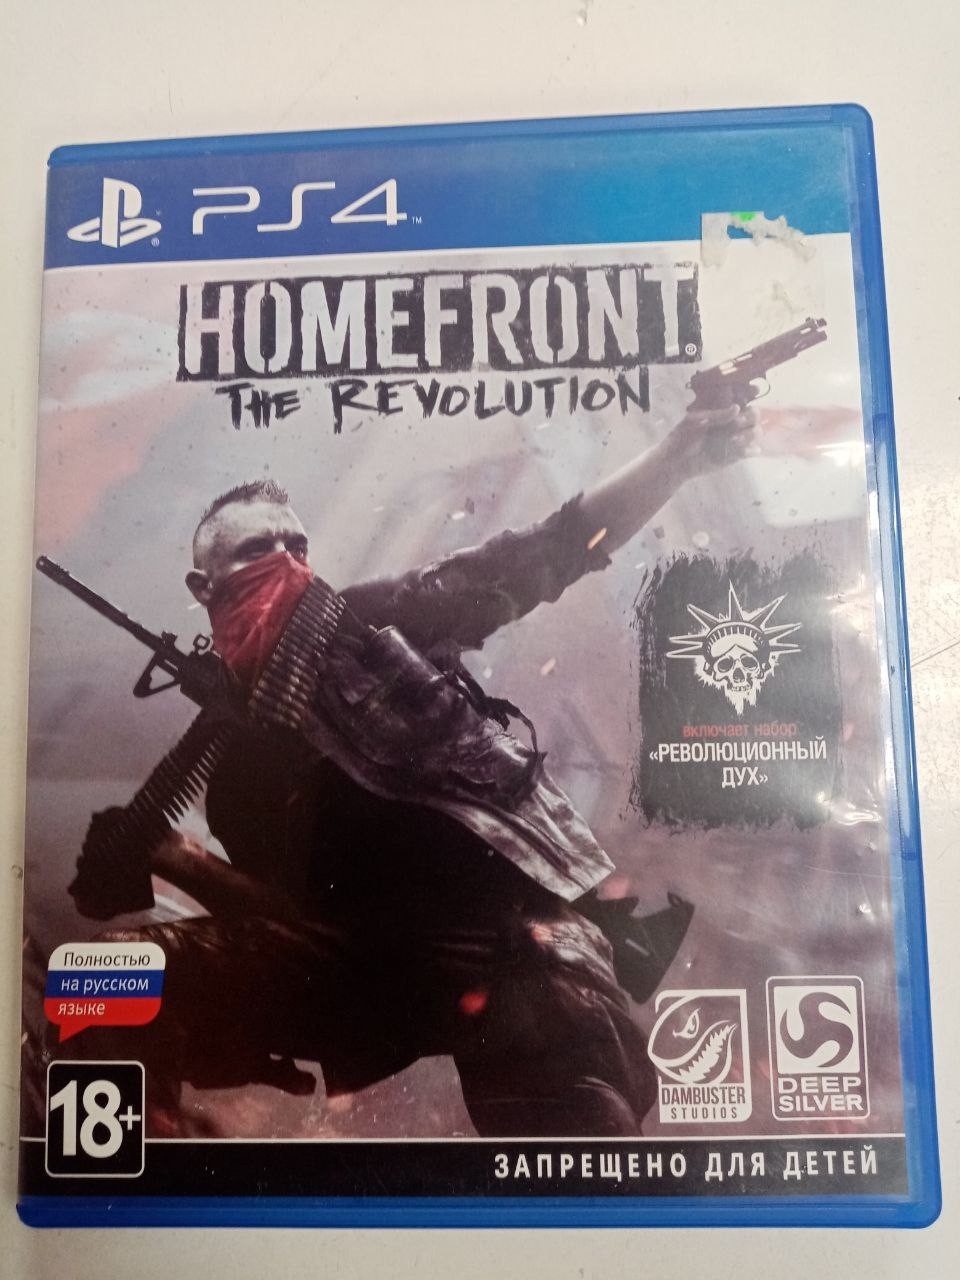 Диск PS4 Homefront